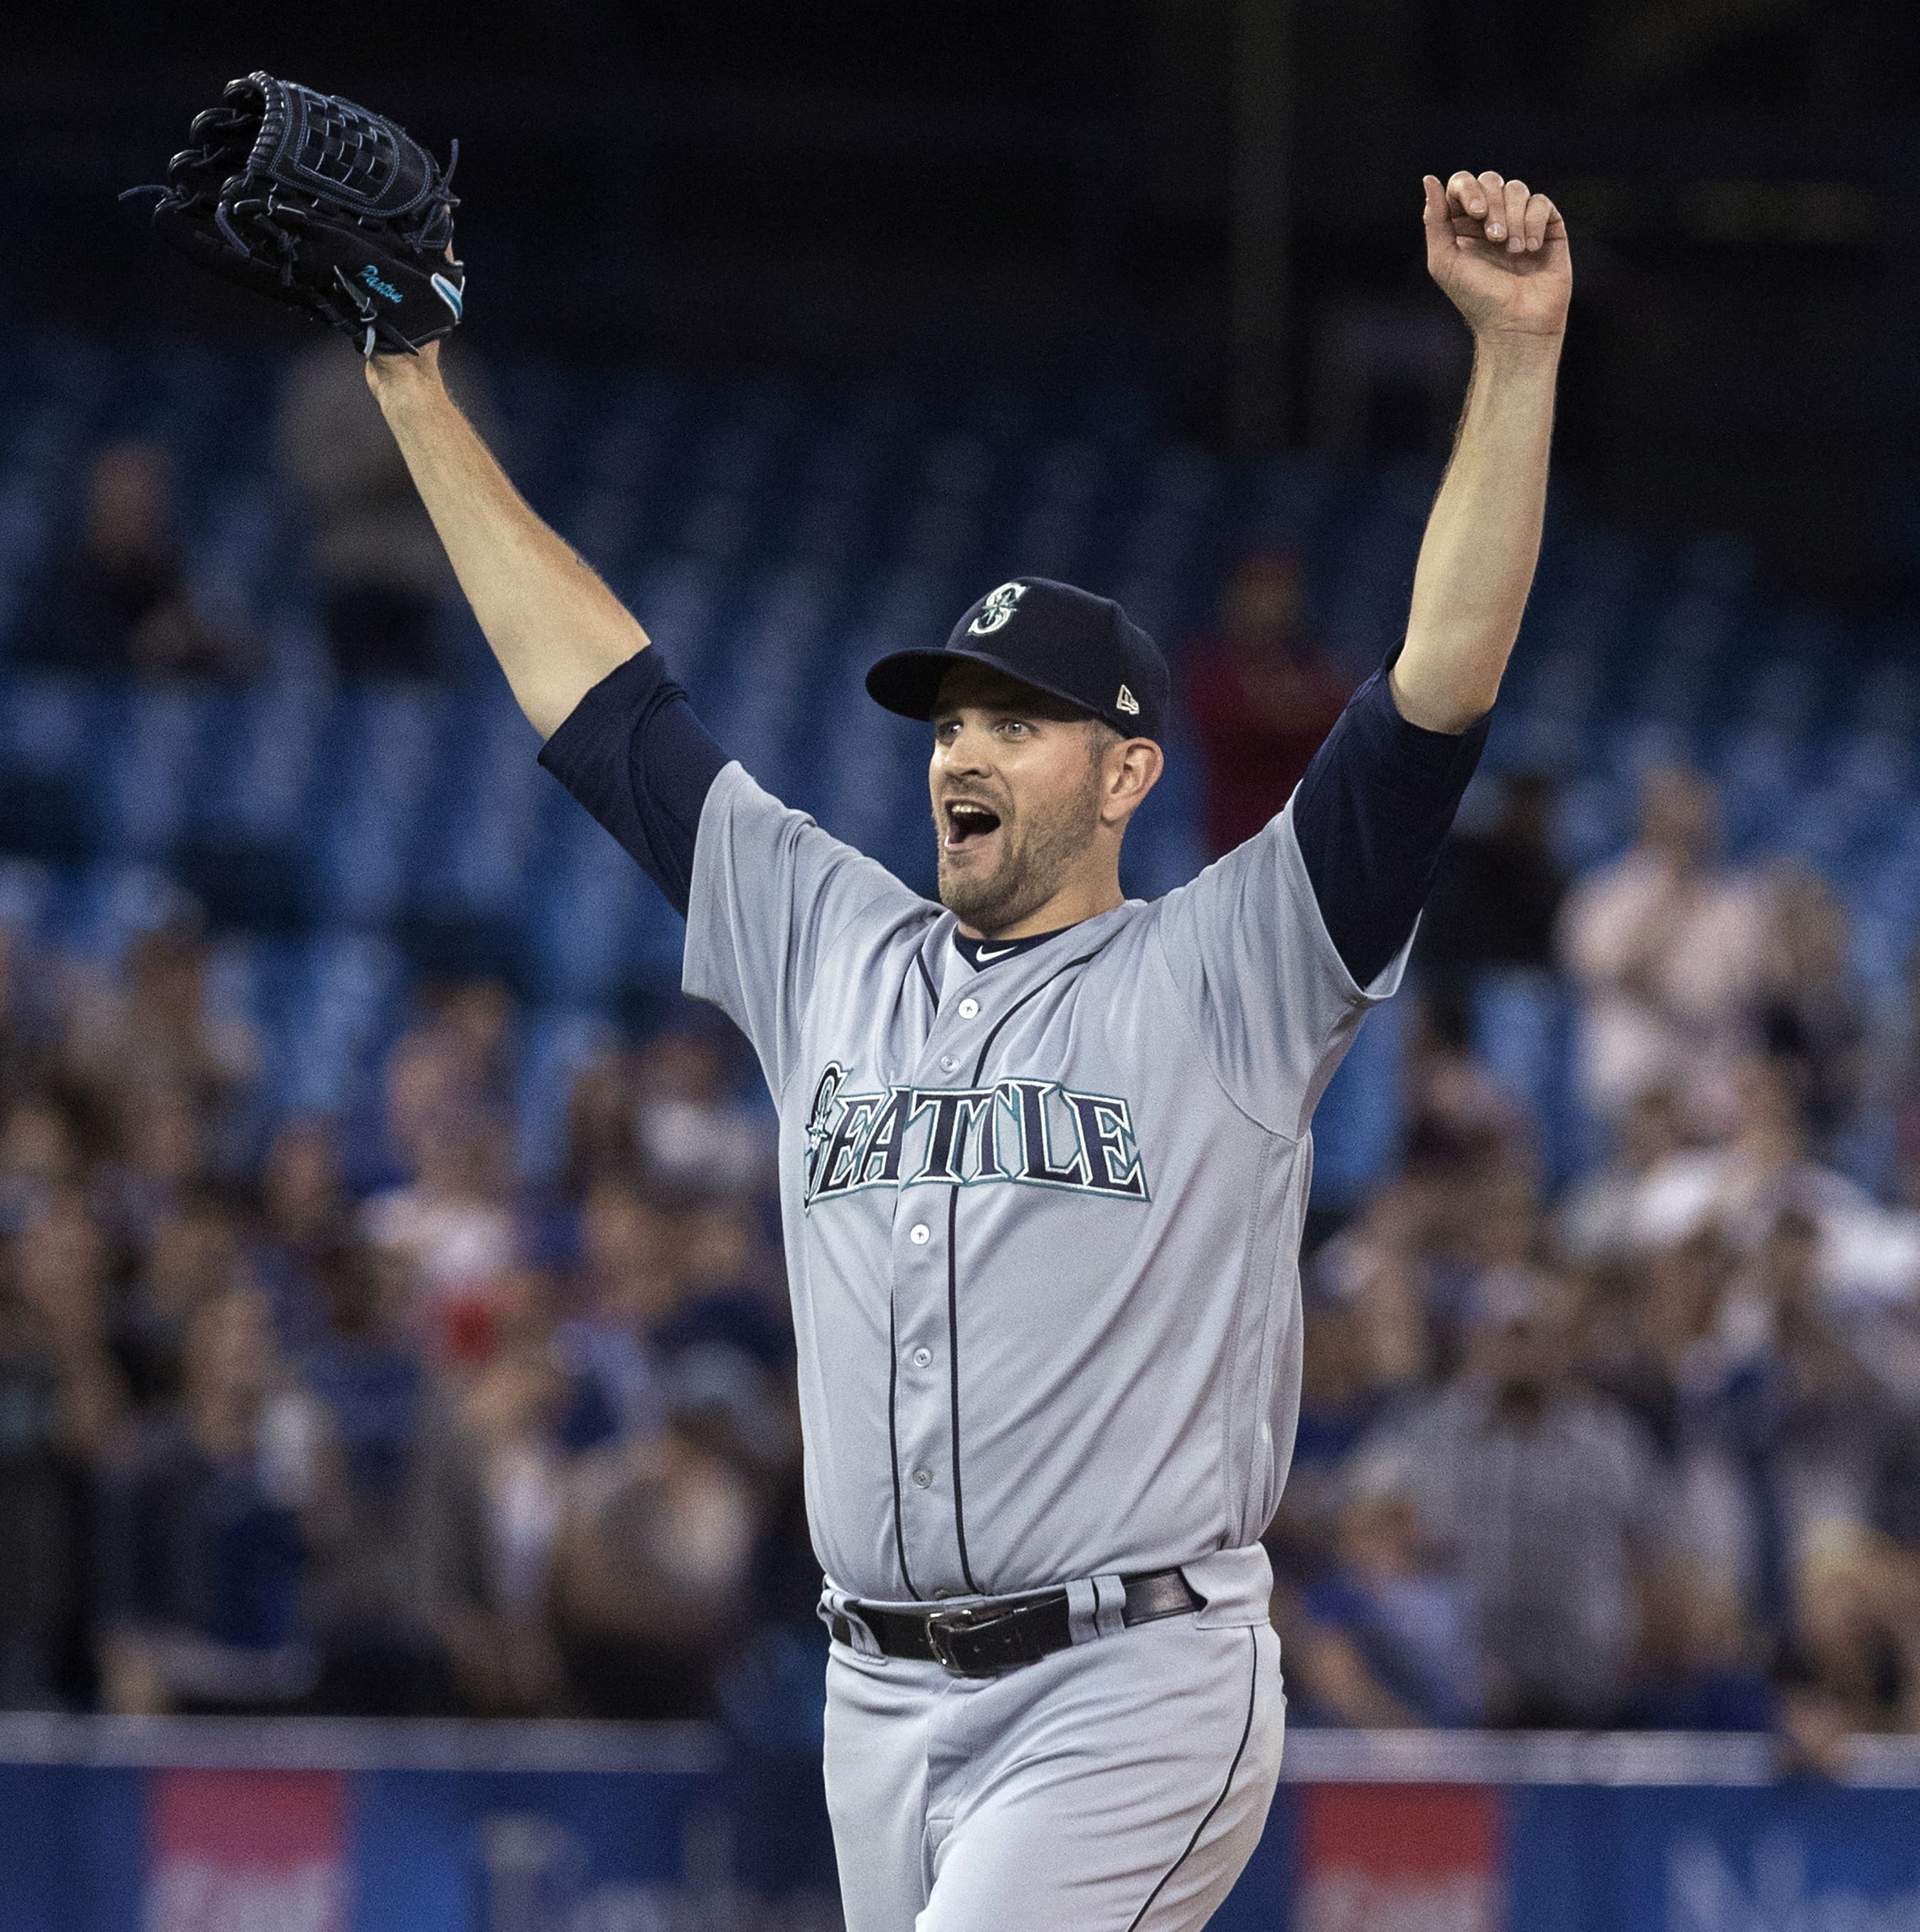 Seattle Mariners starting pitcher James Paxton celebrates after throwing a no-hitter against the Toronto Blue Jays in a baseball game Tuesday, May 8, 2018, in Toronto.